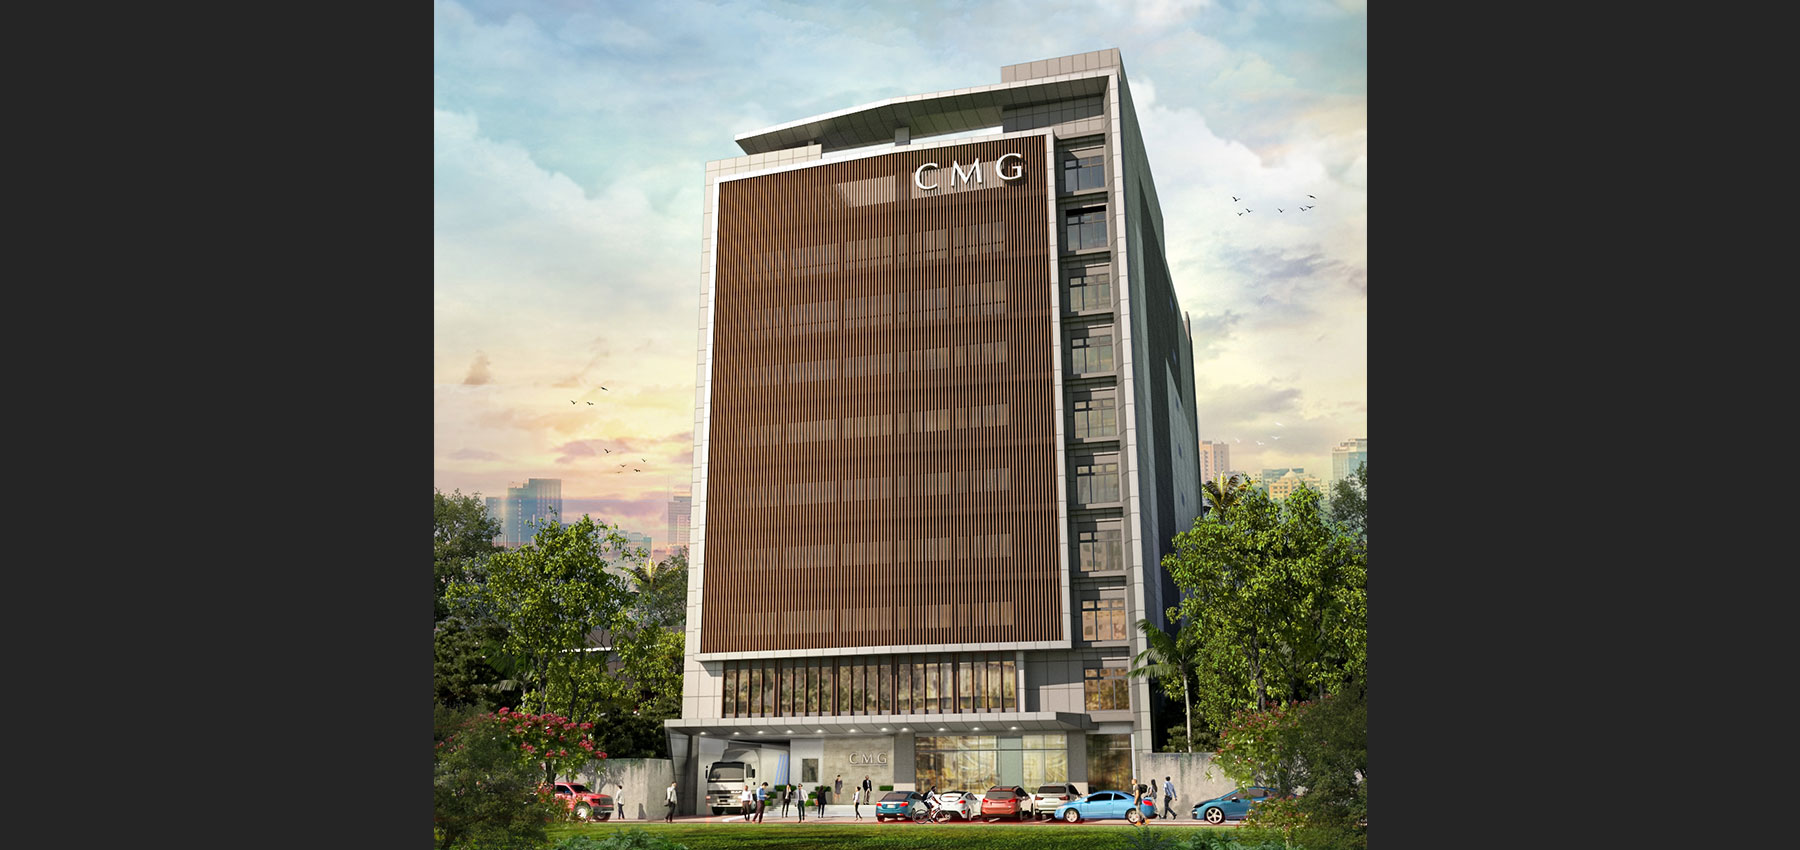 CMG Corporate Office Building and Warehouse Building